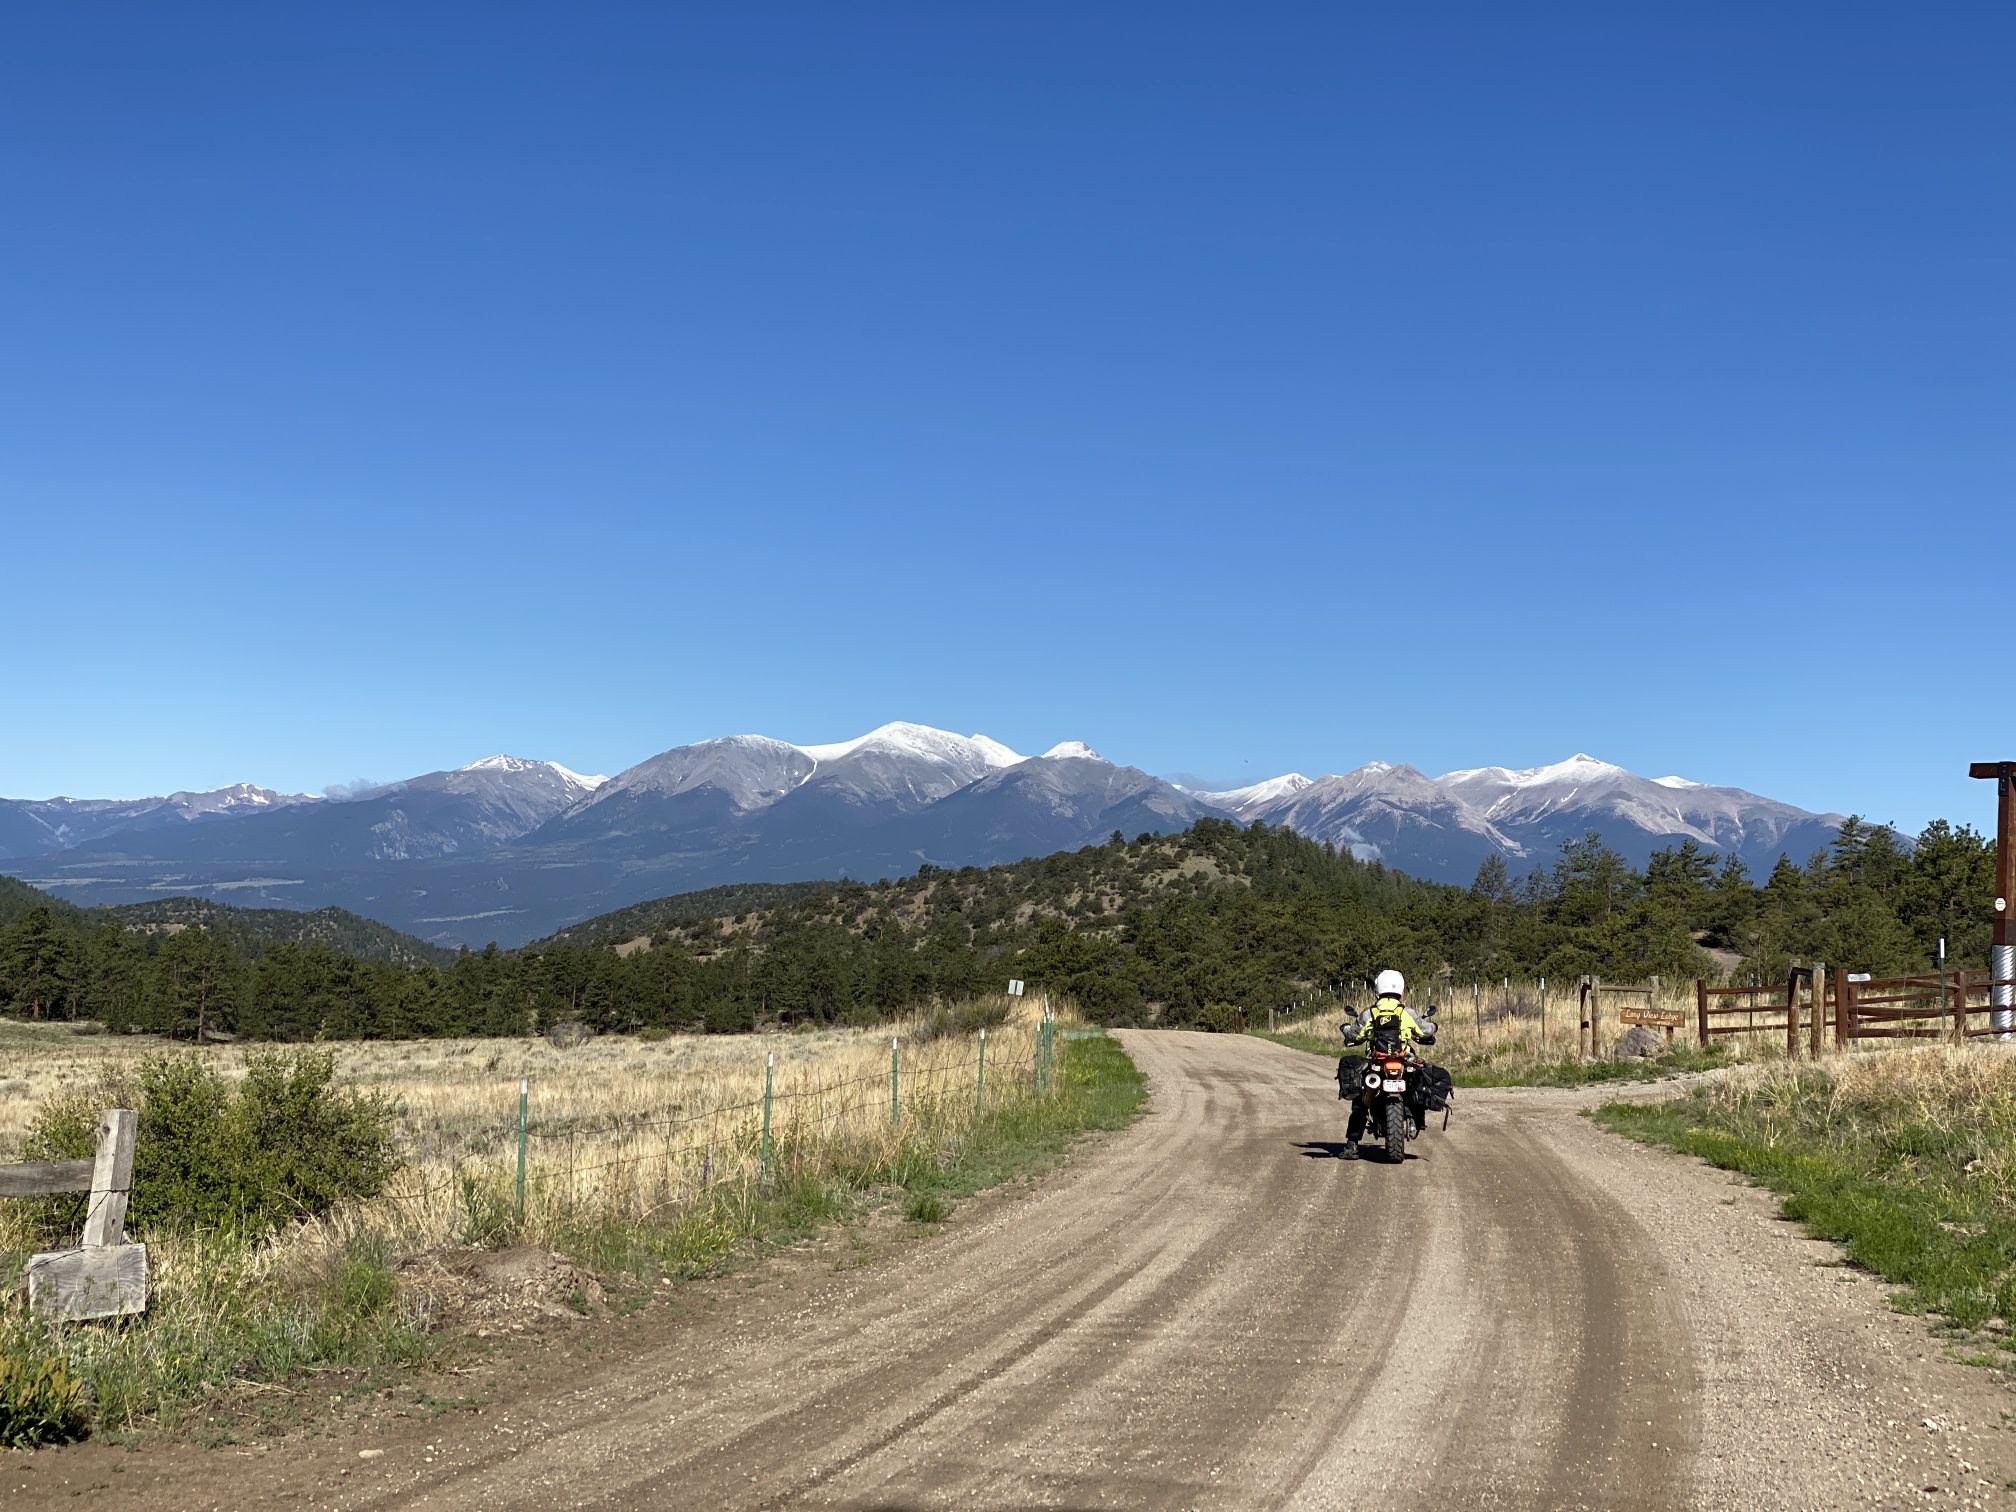 Great 3 Day Adventure Ride Over 8 Colorado Mountain Passes